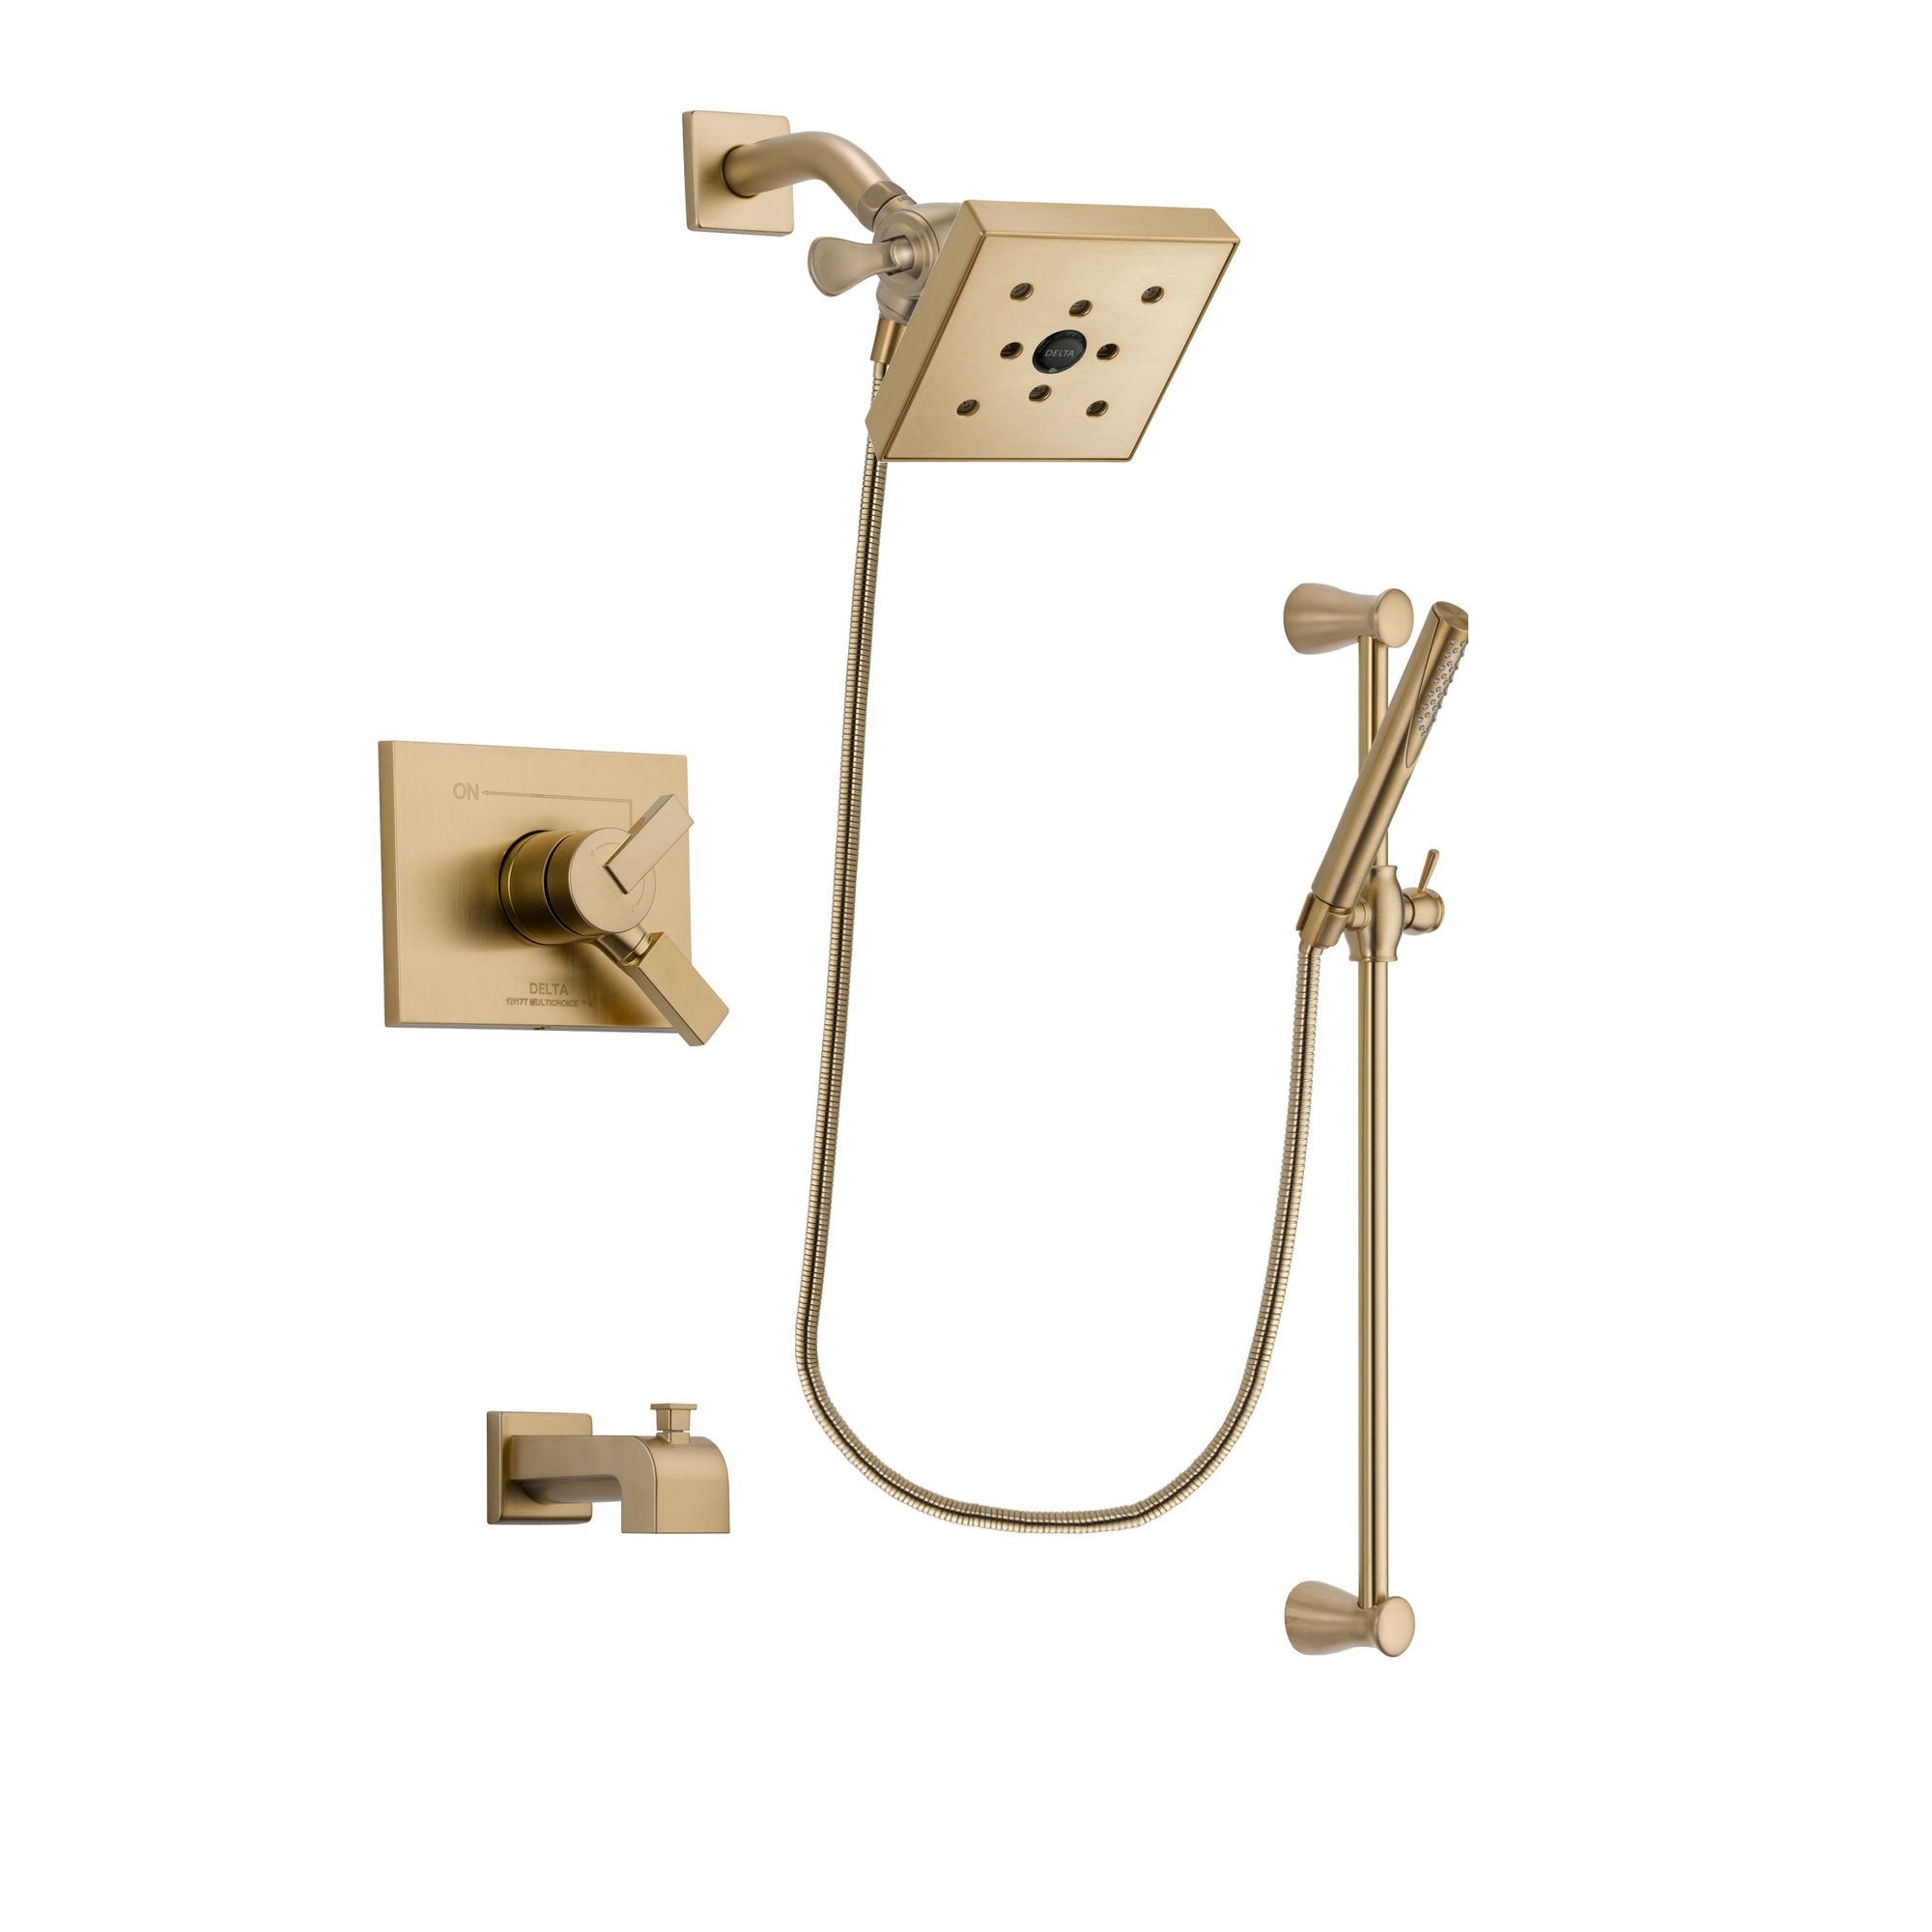 Delta Vero Champagne Bronze Finish Dual Control Tub and Shower Faucet System Package with Square Shower Head and Modern Handheld Shower with Slide Bar Includes Rough-in Valve and Tub Spout DSP3979V